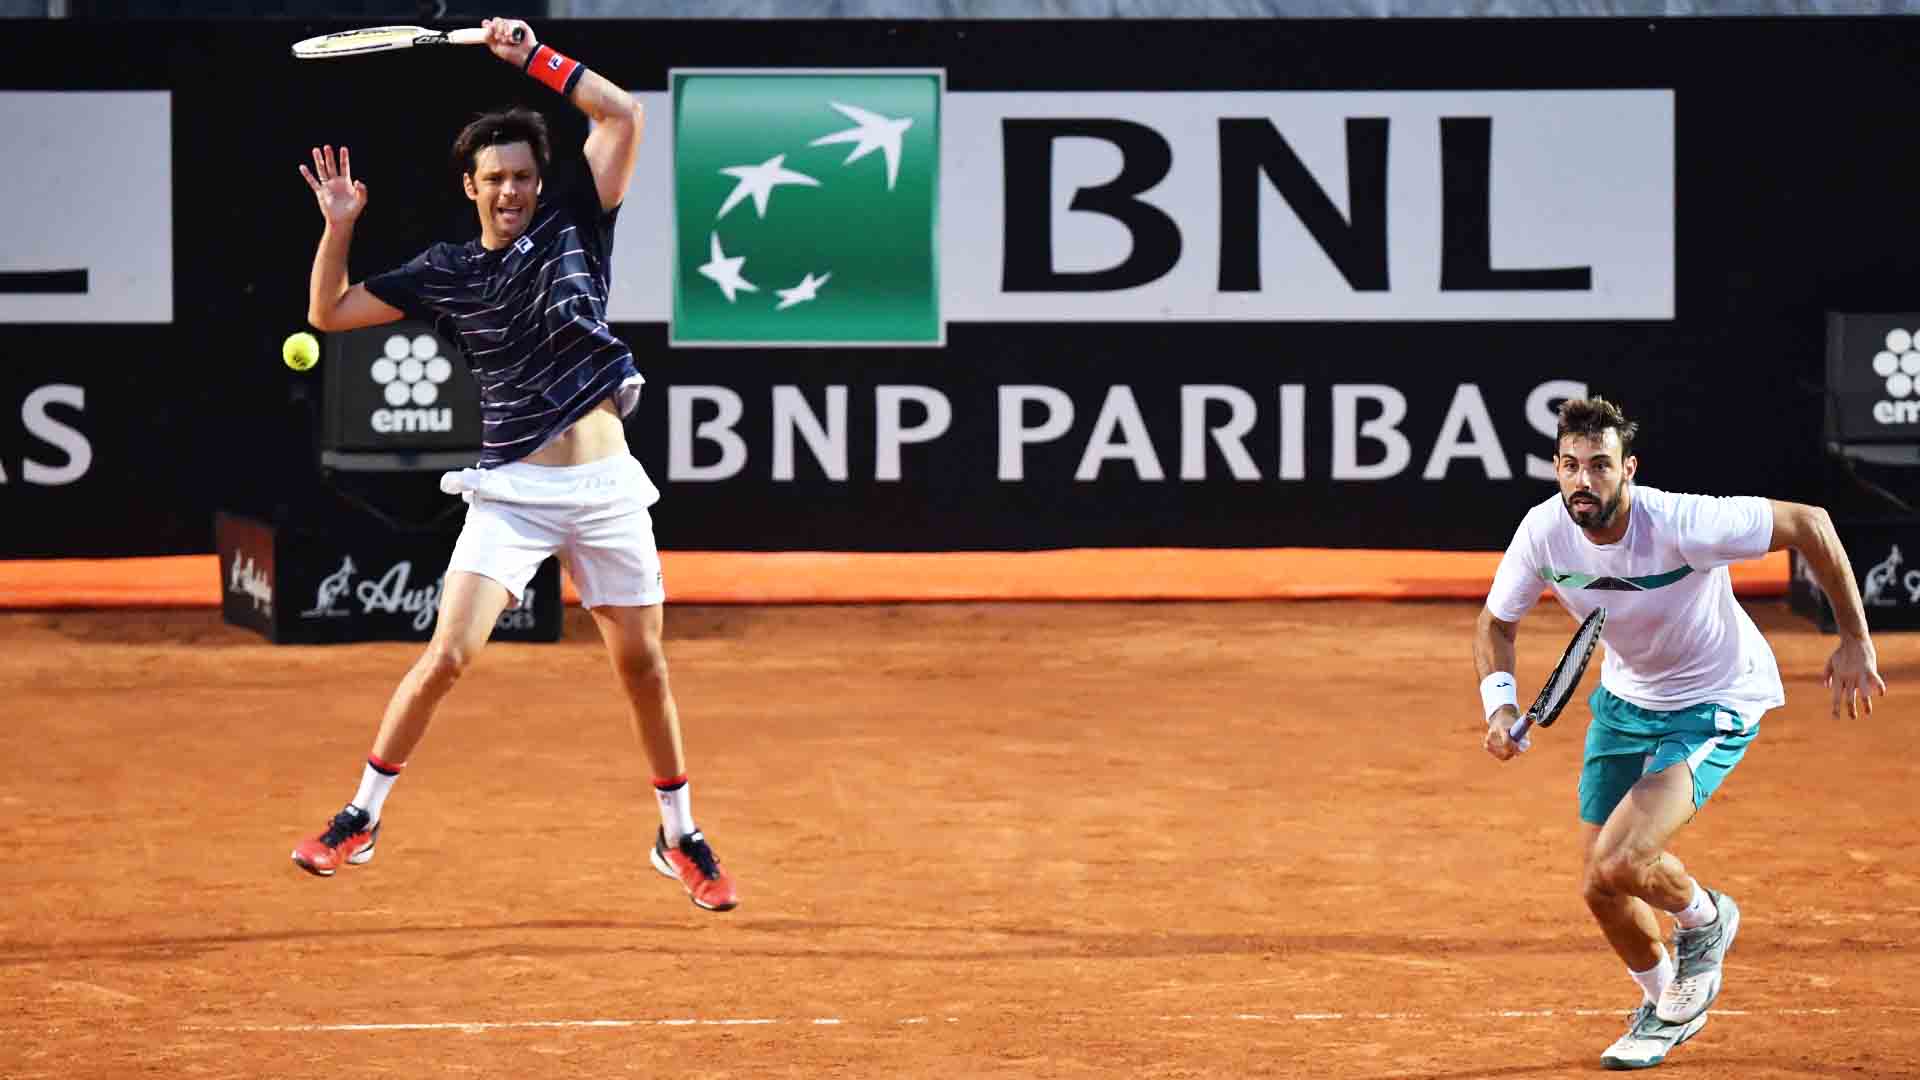 <a href='https://www.atptour.com/en/players/marcel-granollers/g710/overview'>Marcel Granollers</a> (right) and <a href='https://www.atptour.com/en/players/horacio-zeballos/z184/overview'>Horacio Zeballos</a> (left) have reached four finals from as many clay events this year.